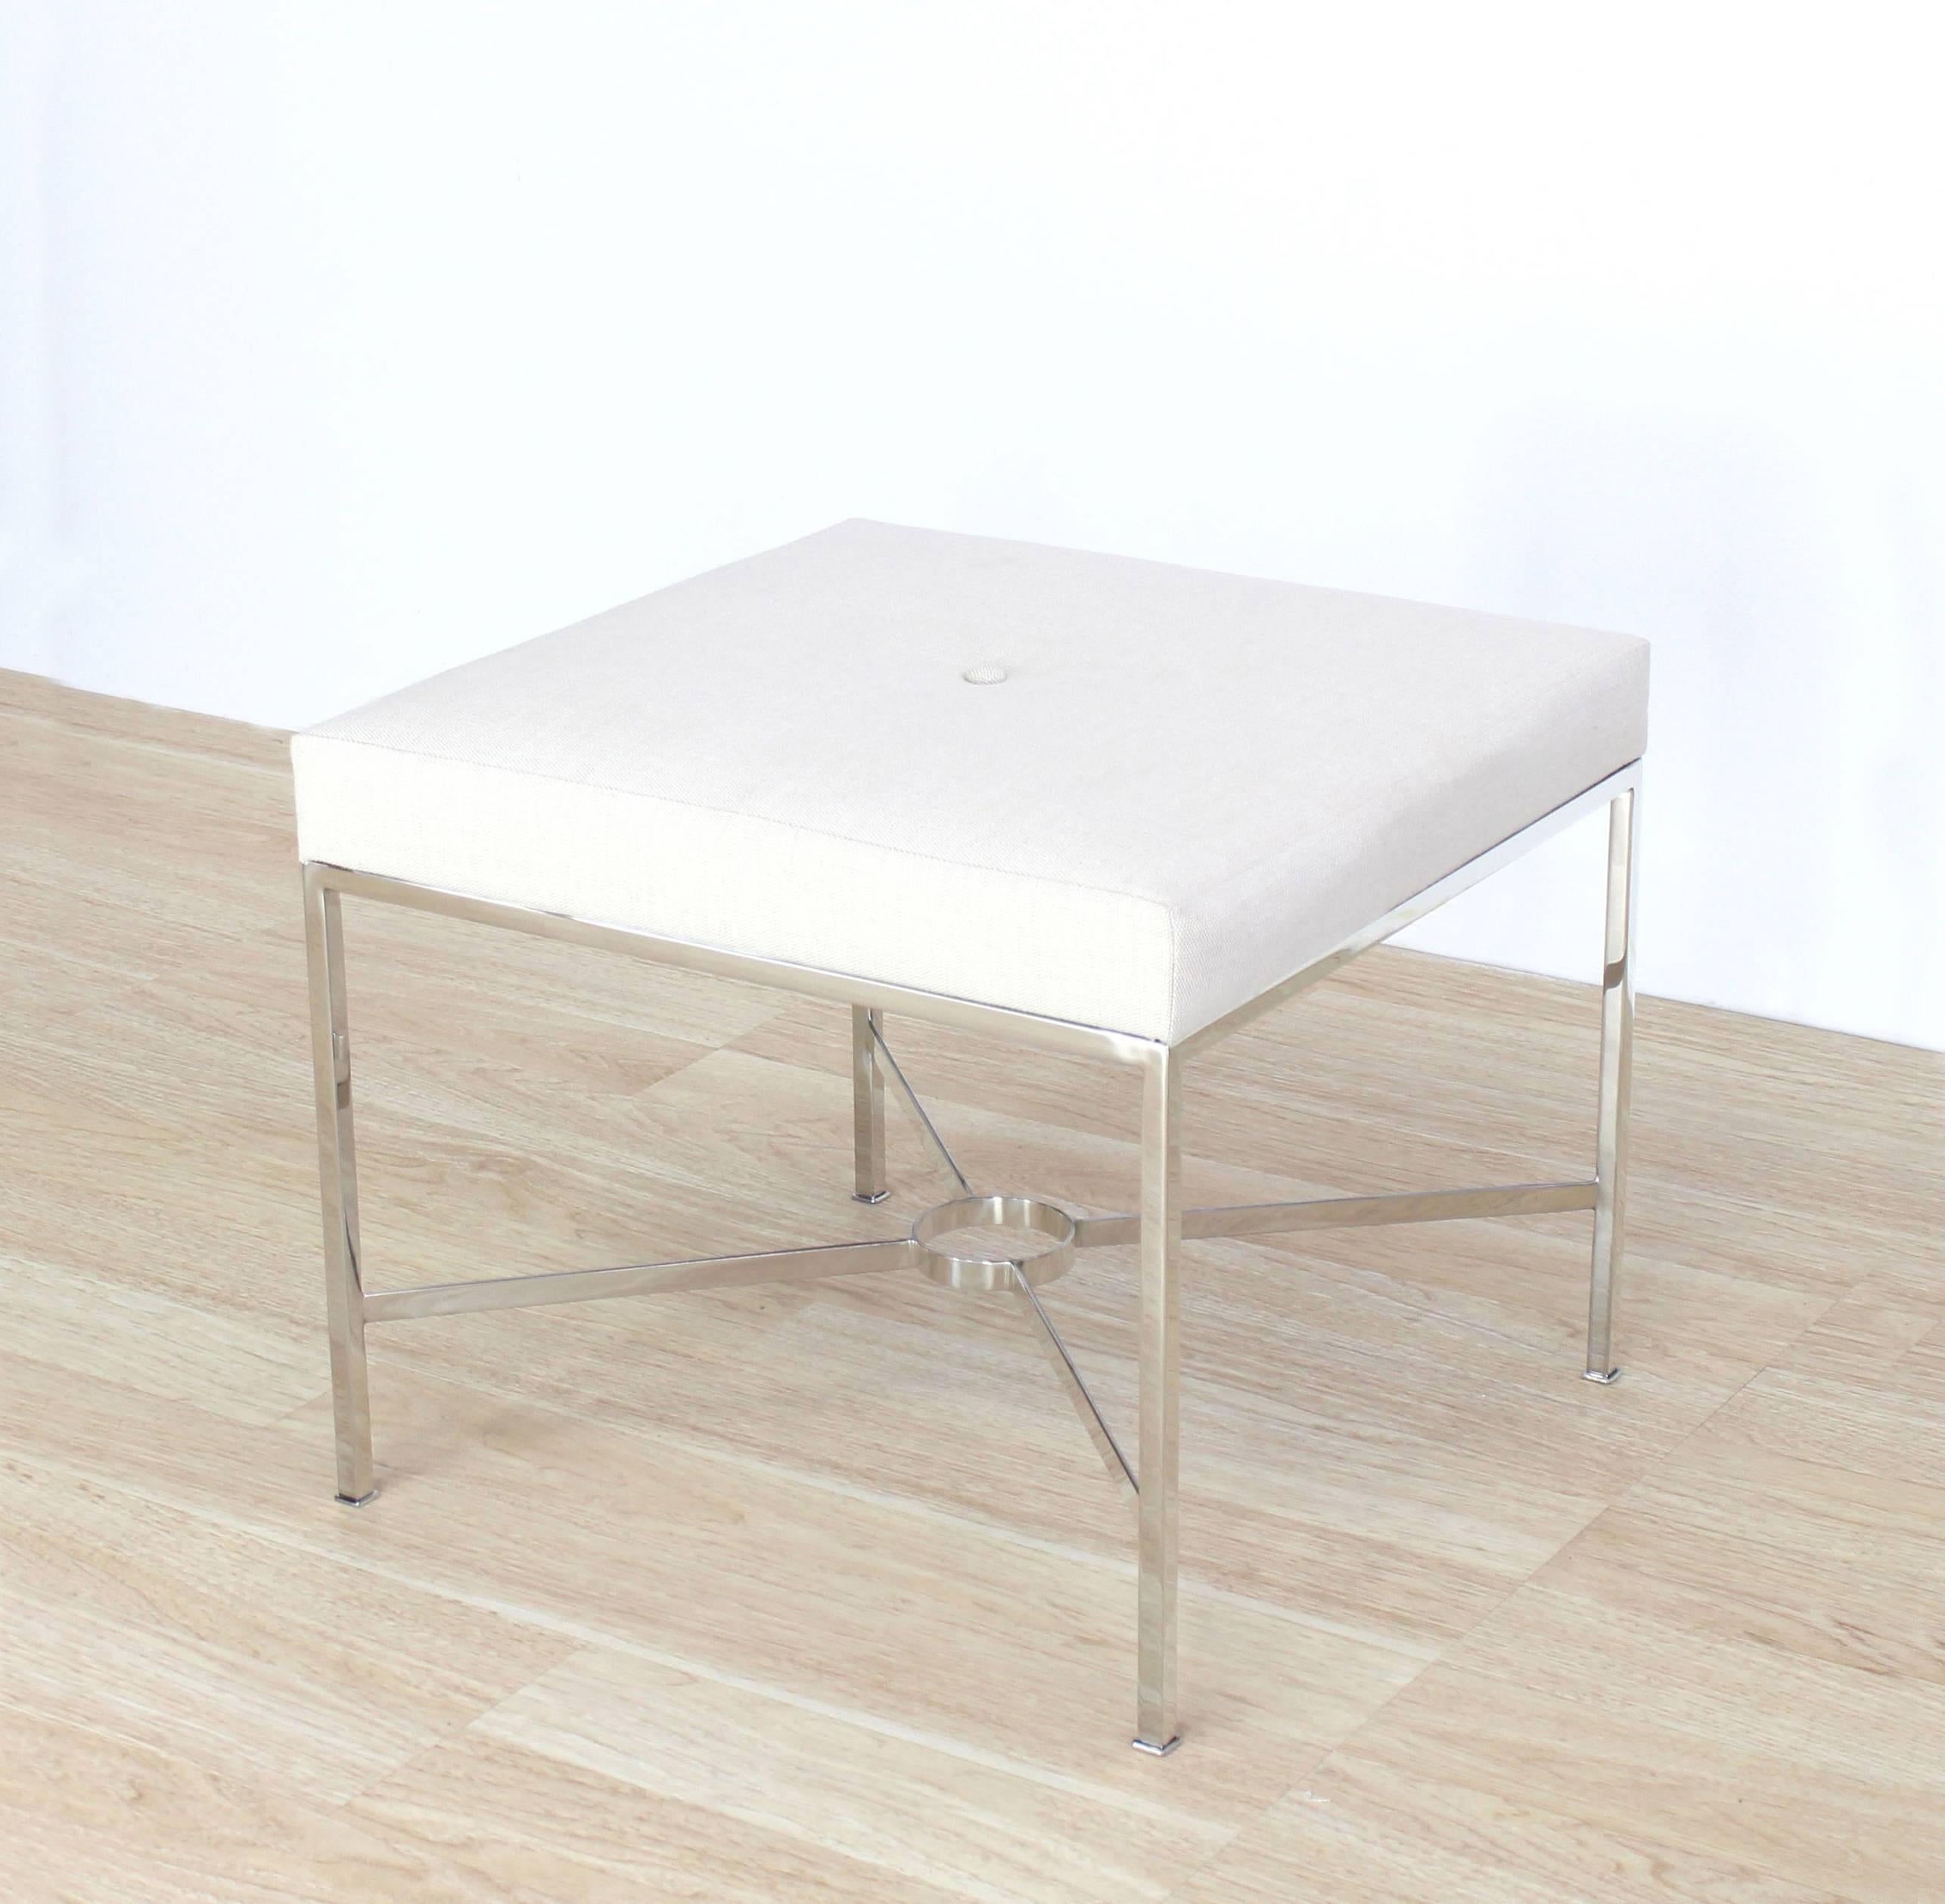 Stainless steel X base bench with fabric upholstery.